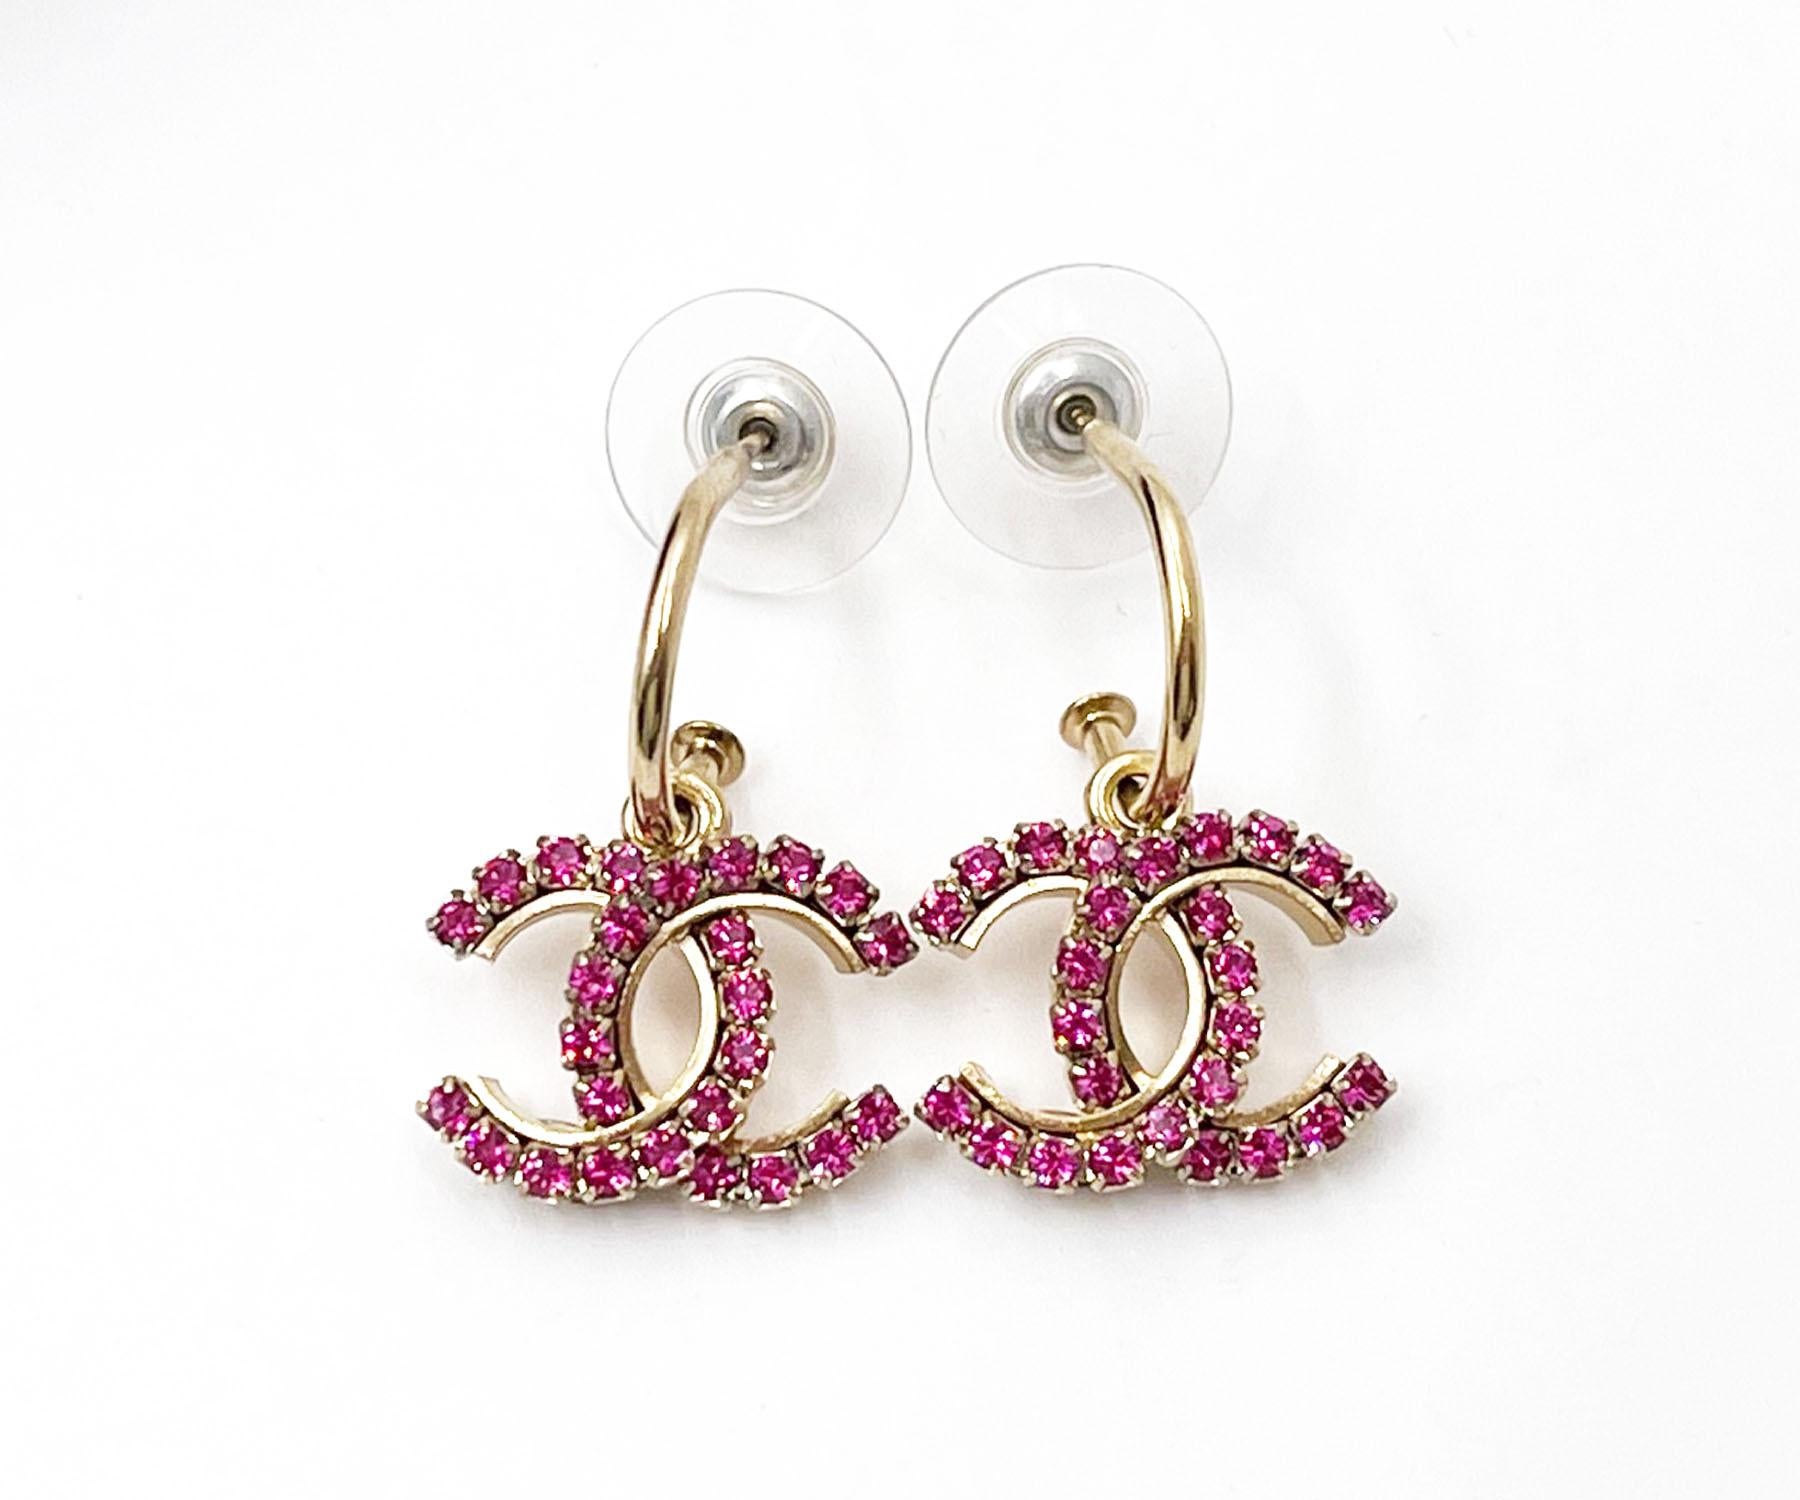 Chanel Gold Plated  CC Fuchsia Crystal Hoop Piercing Earrings

* Marked 12
* Made in France
* Comes with the original box

-It is approximately 1.1